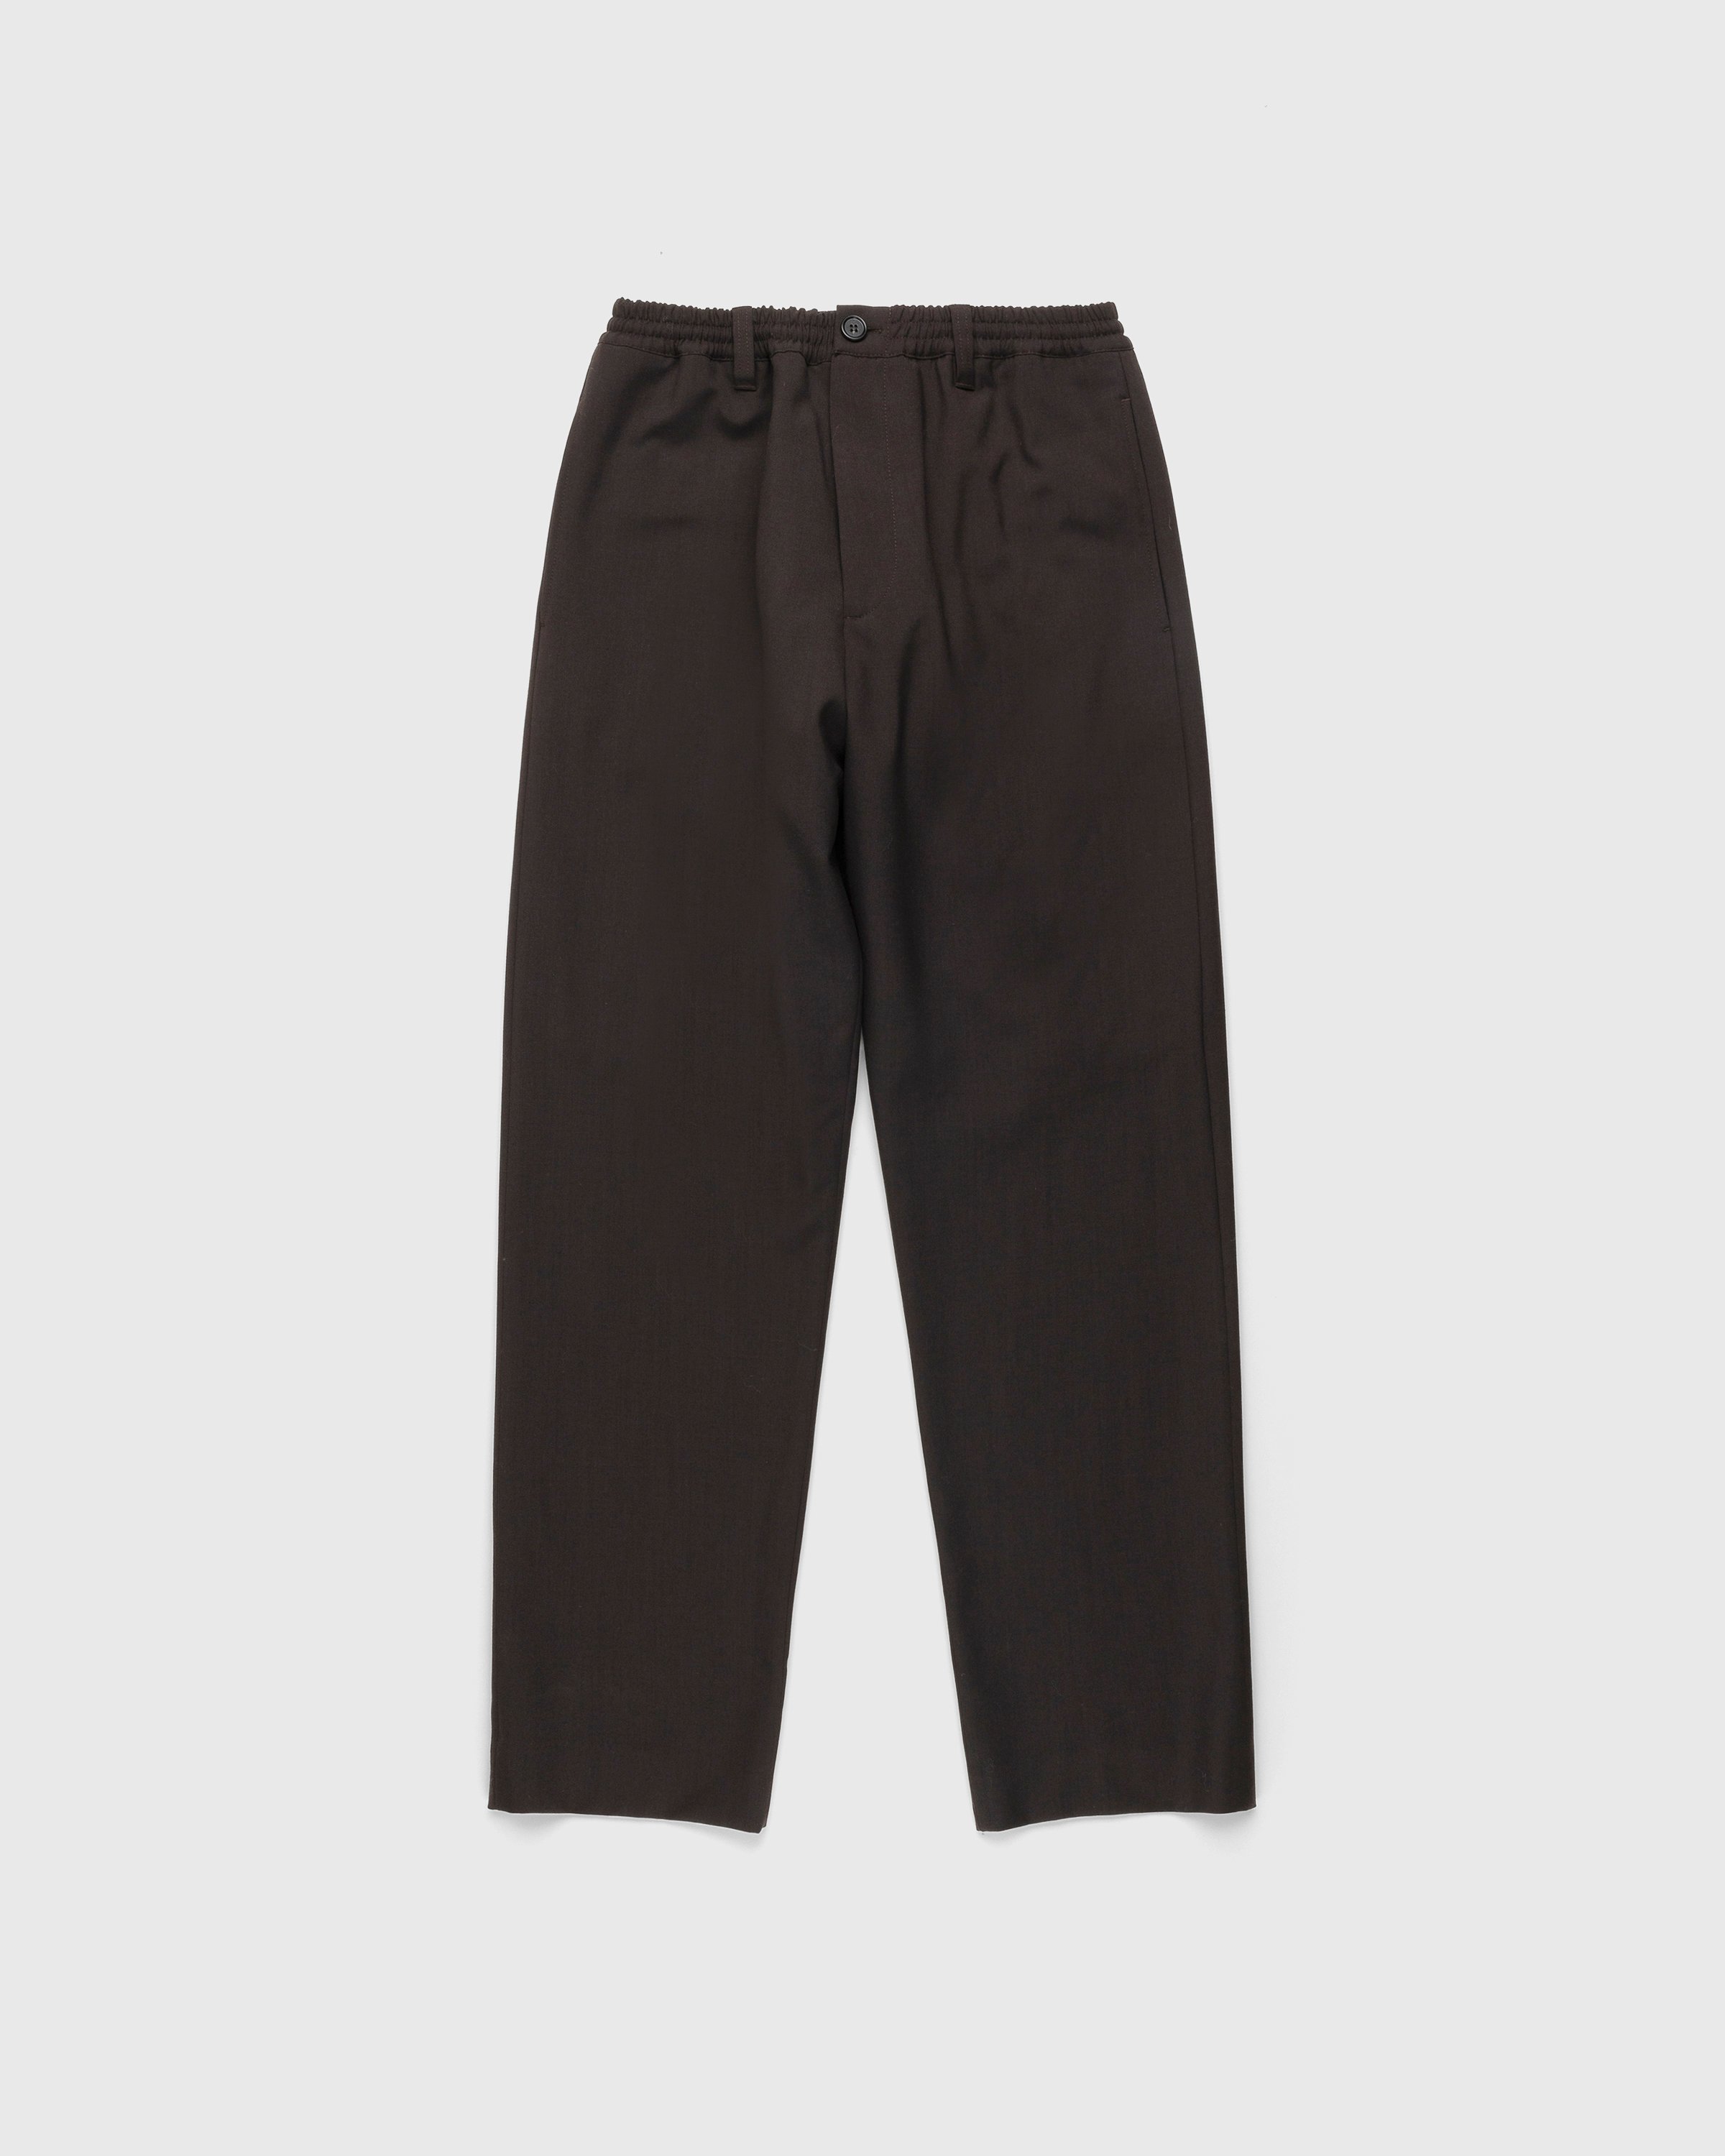 Marni - Trousers Metal Brown - Clothing - Blue - Image 1